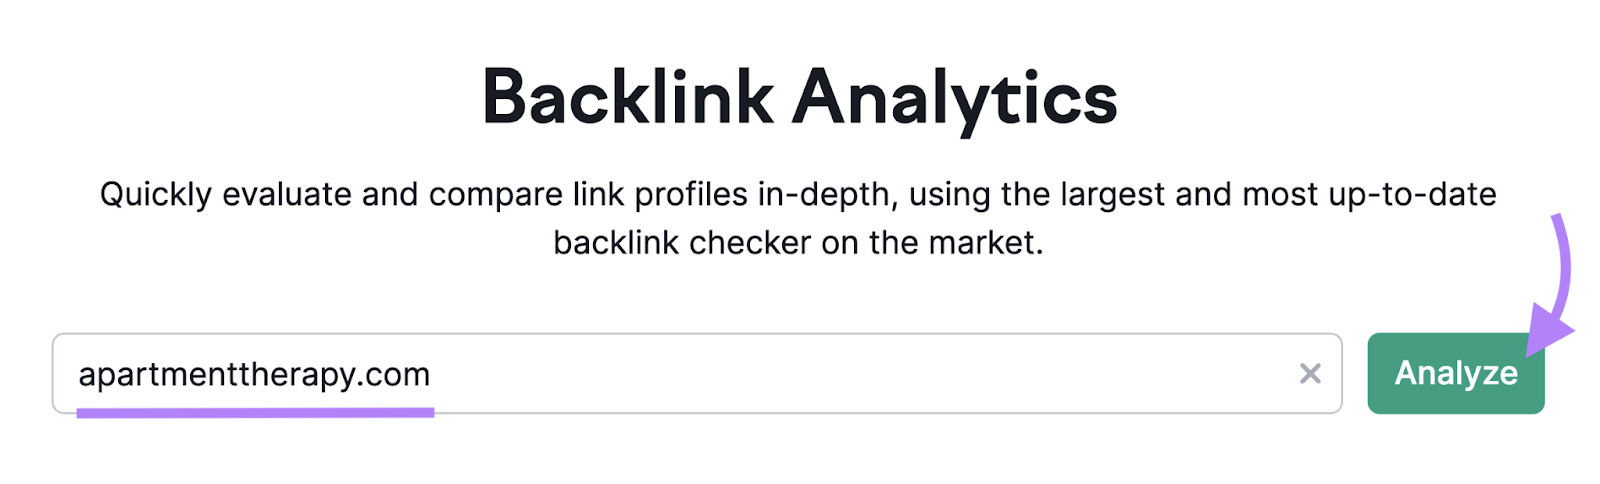 "apartmenttherapy" entered into the Backlink Analytics search bar